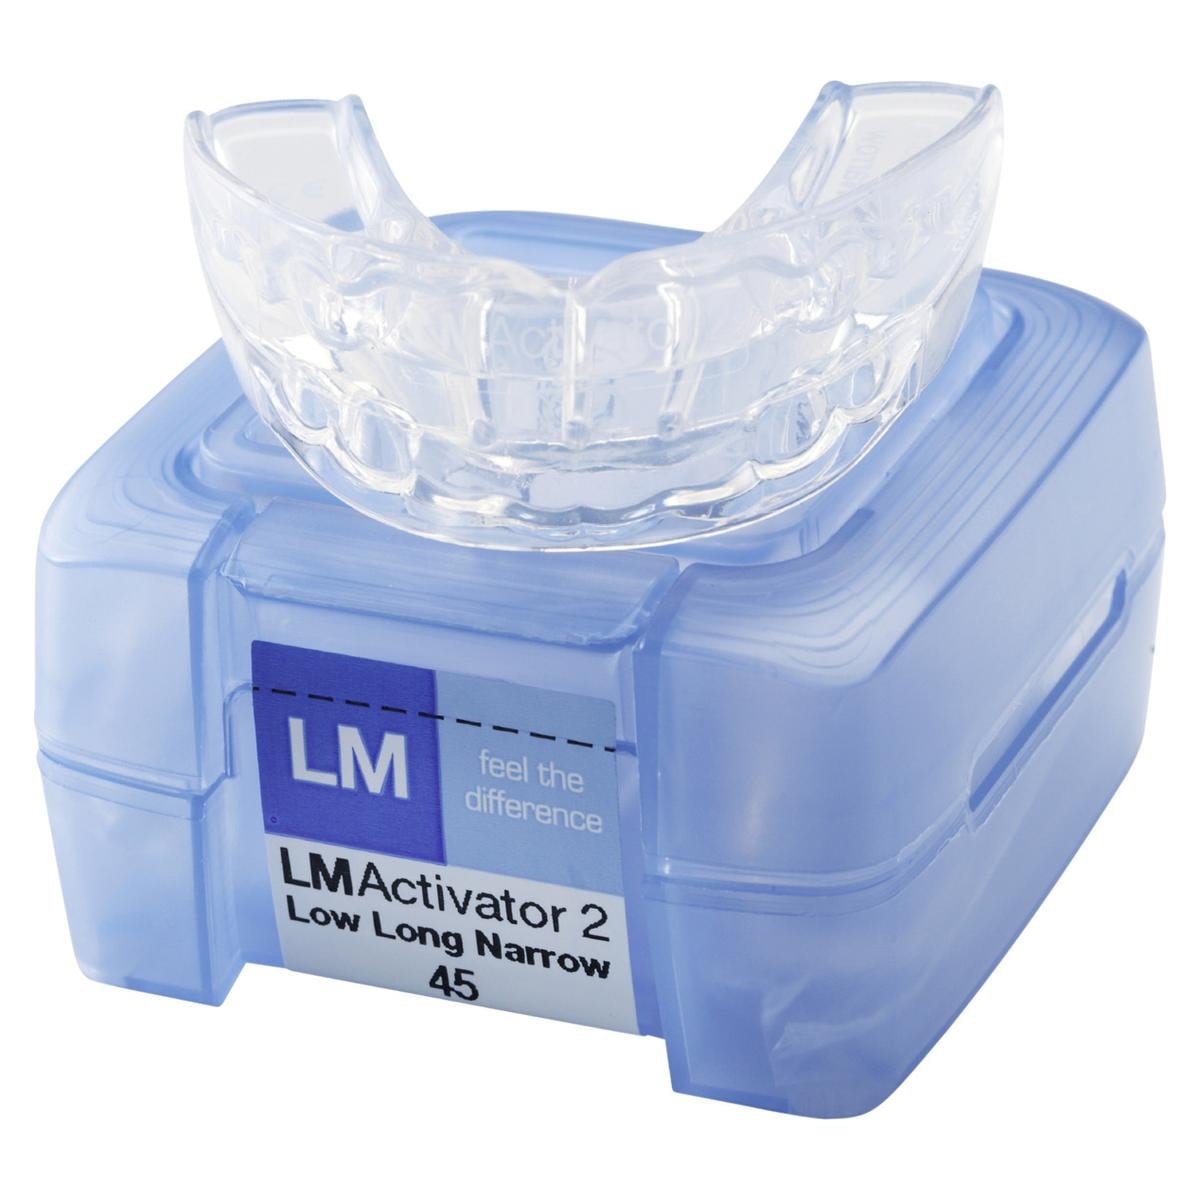 LM Activator 2 Low Long - Narrow - Size 45 (94245LLN)